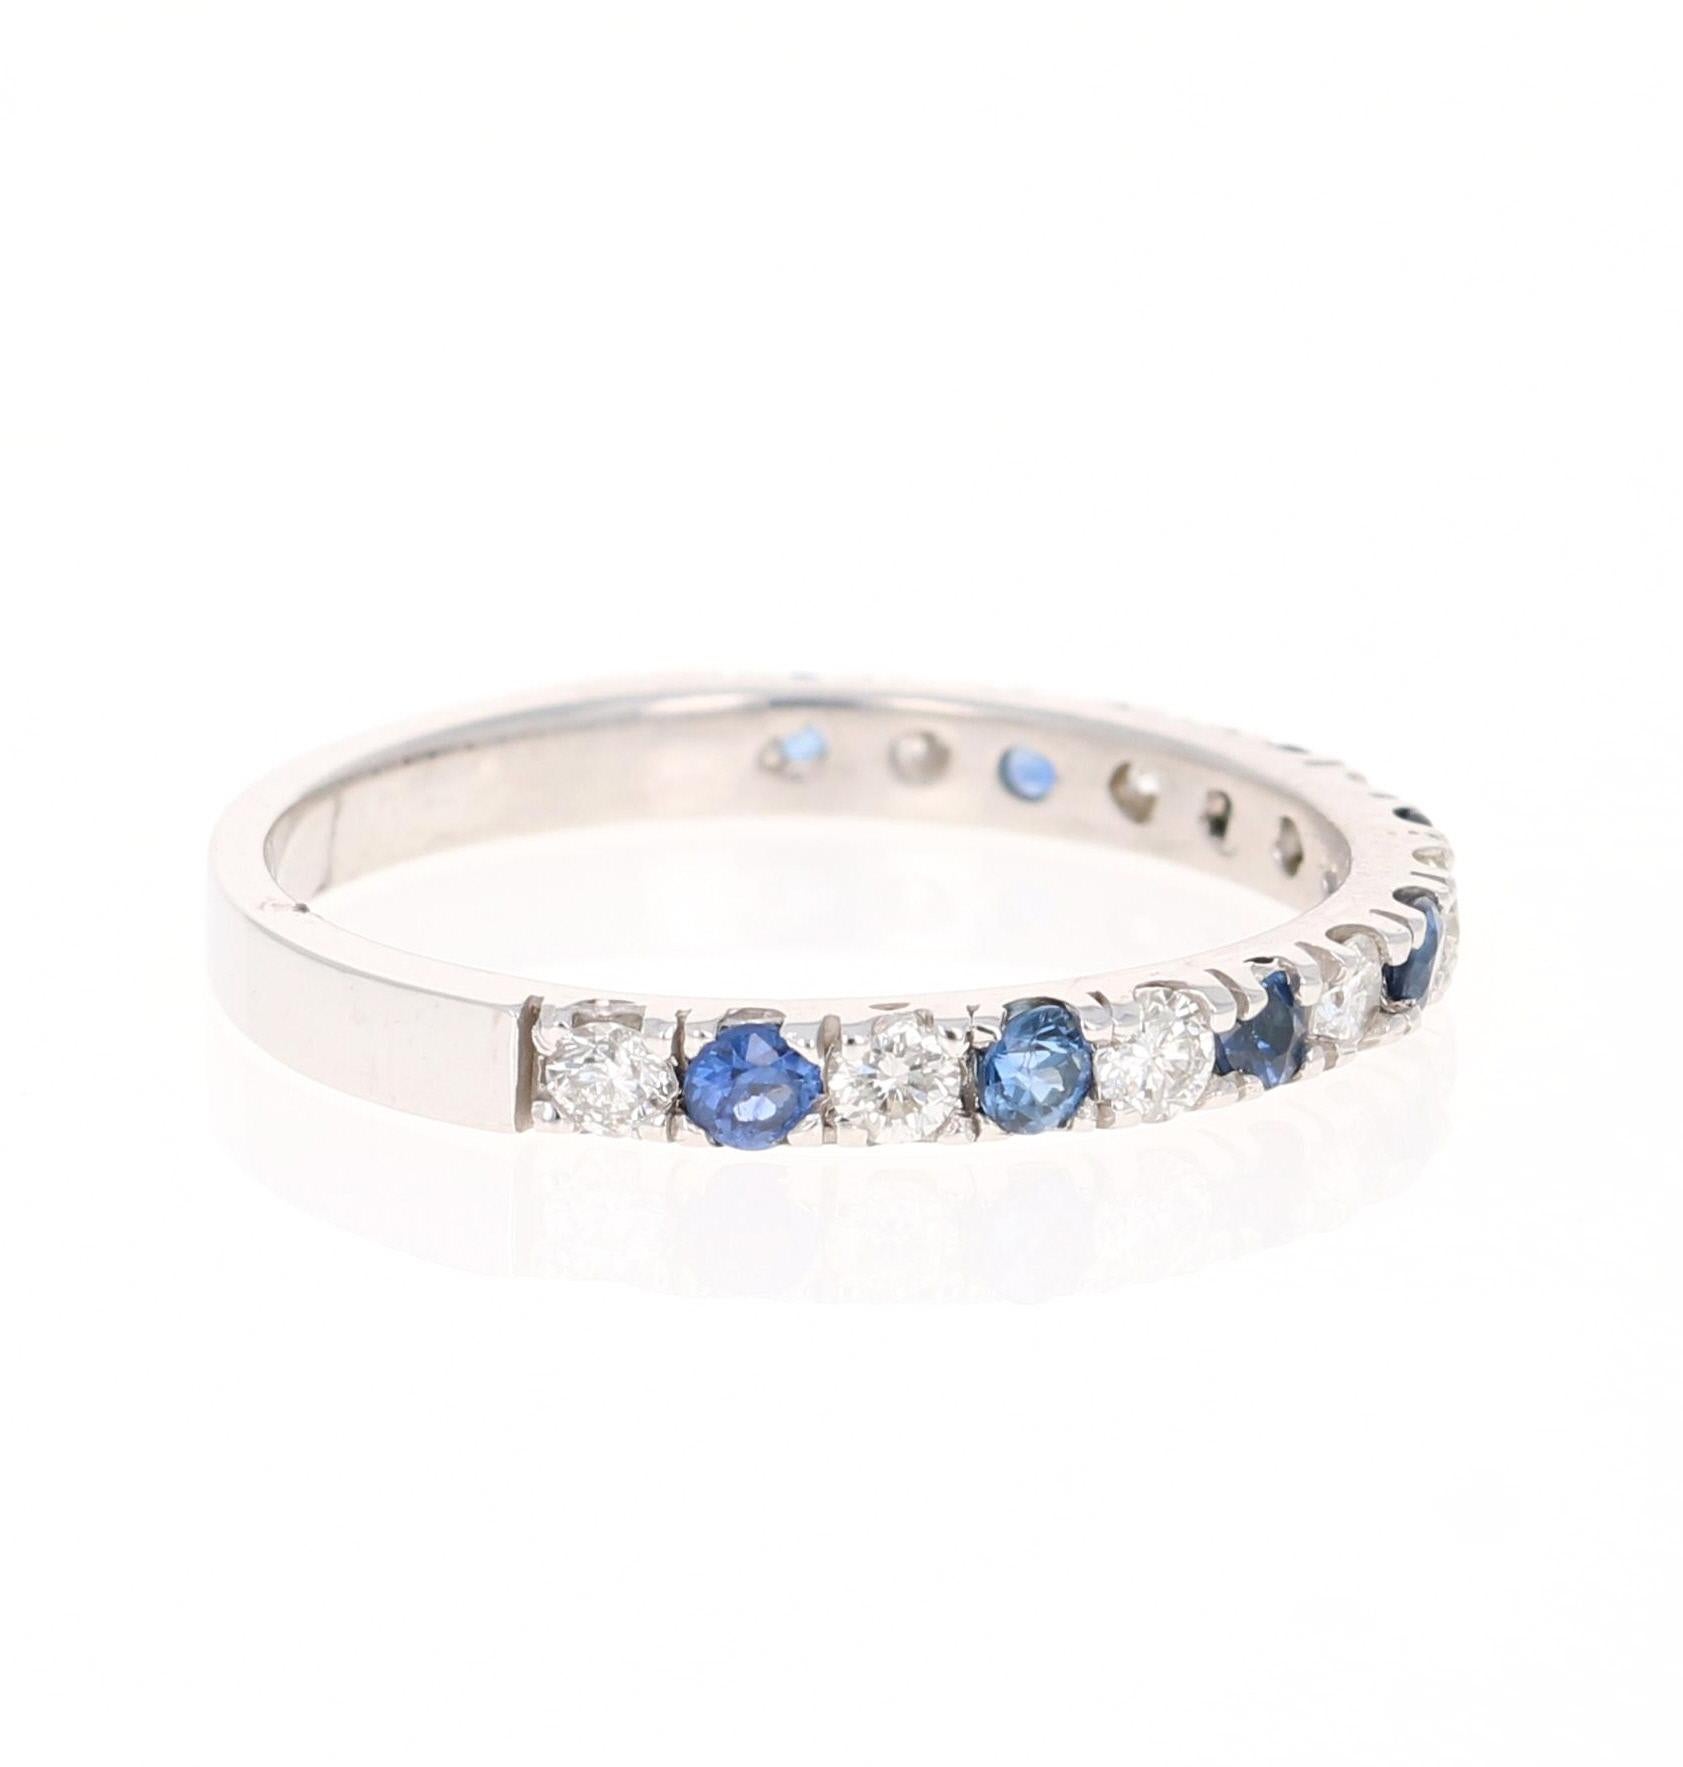 Cute and dainty Sapphire and Diamond band that is sure to be a great addition to anyone's collection. 

There are 8 Round Cut Sapphires that weigh 0.40 carats and 8 Round Cut Diamonds that weigh 0.31 carats (Clarity: SI2, Color: F). The total carat